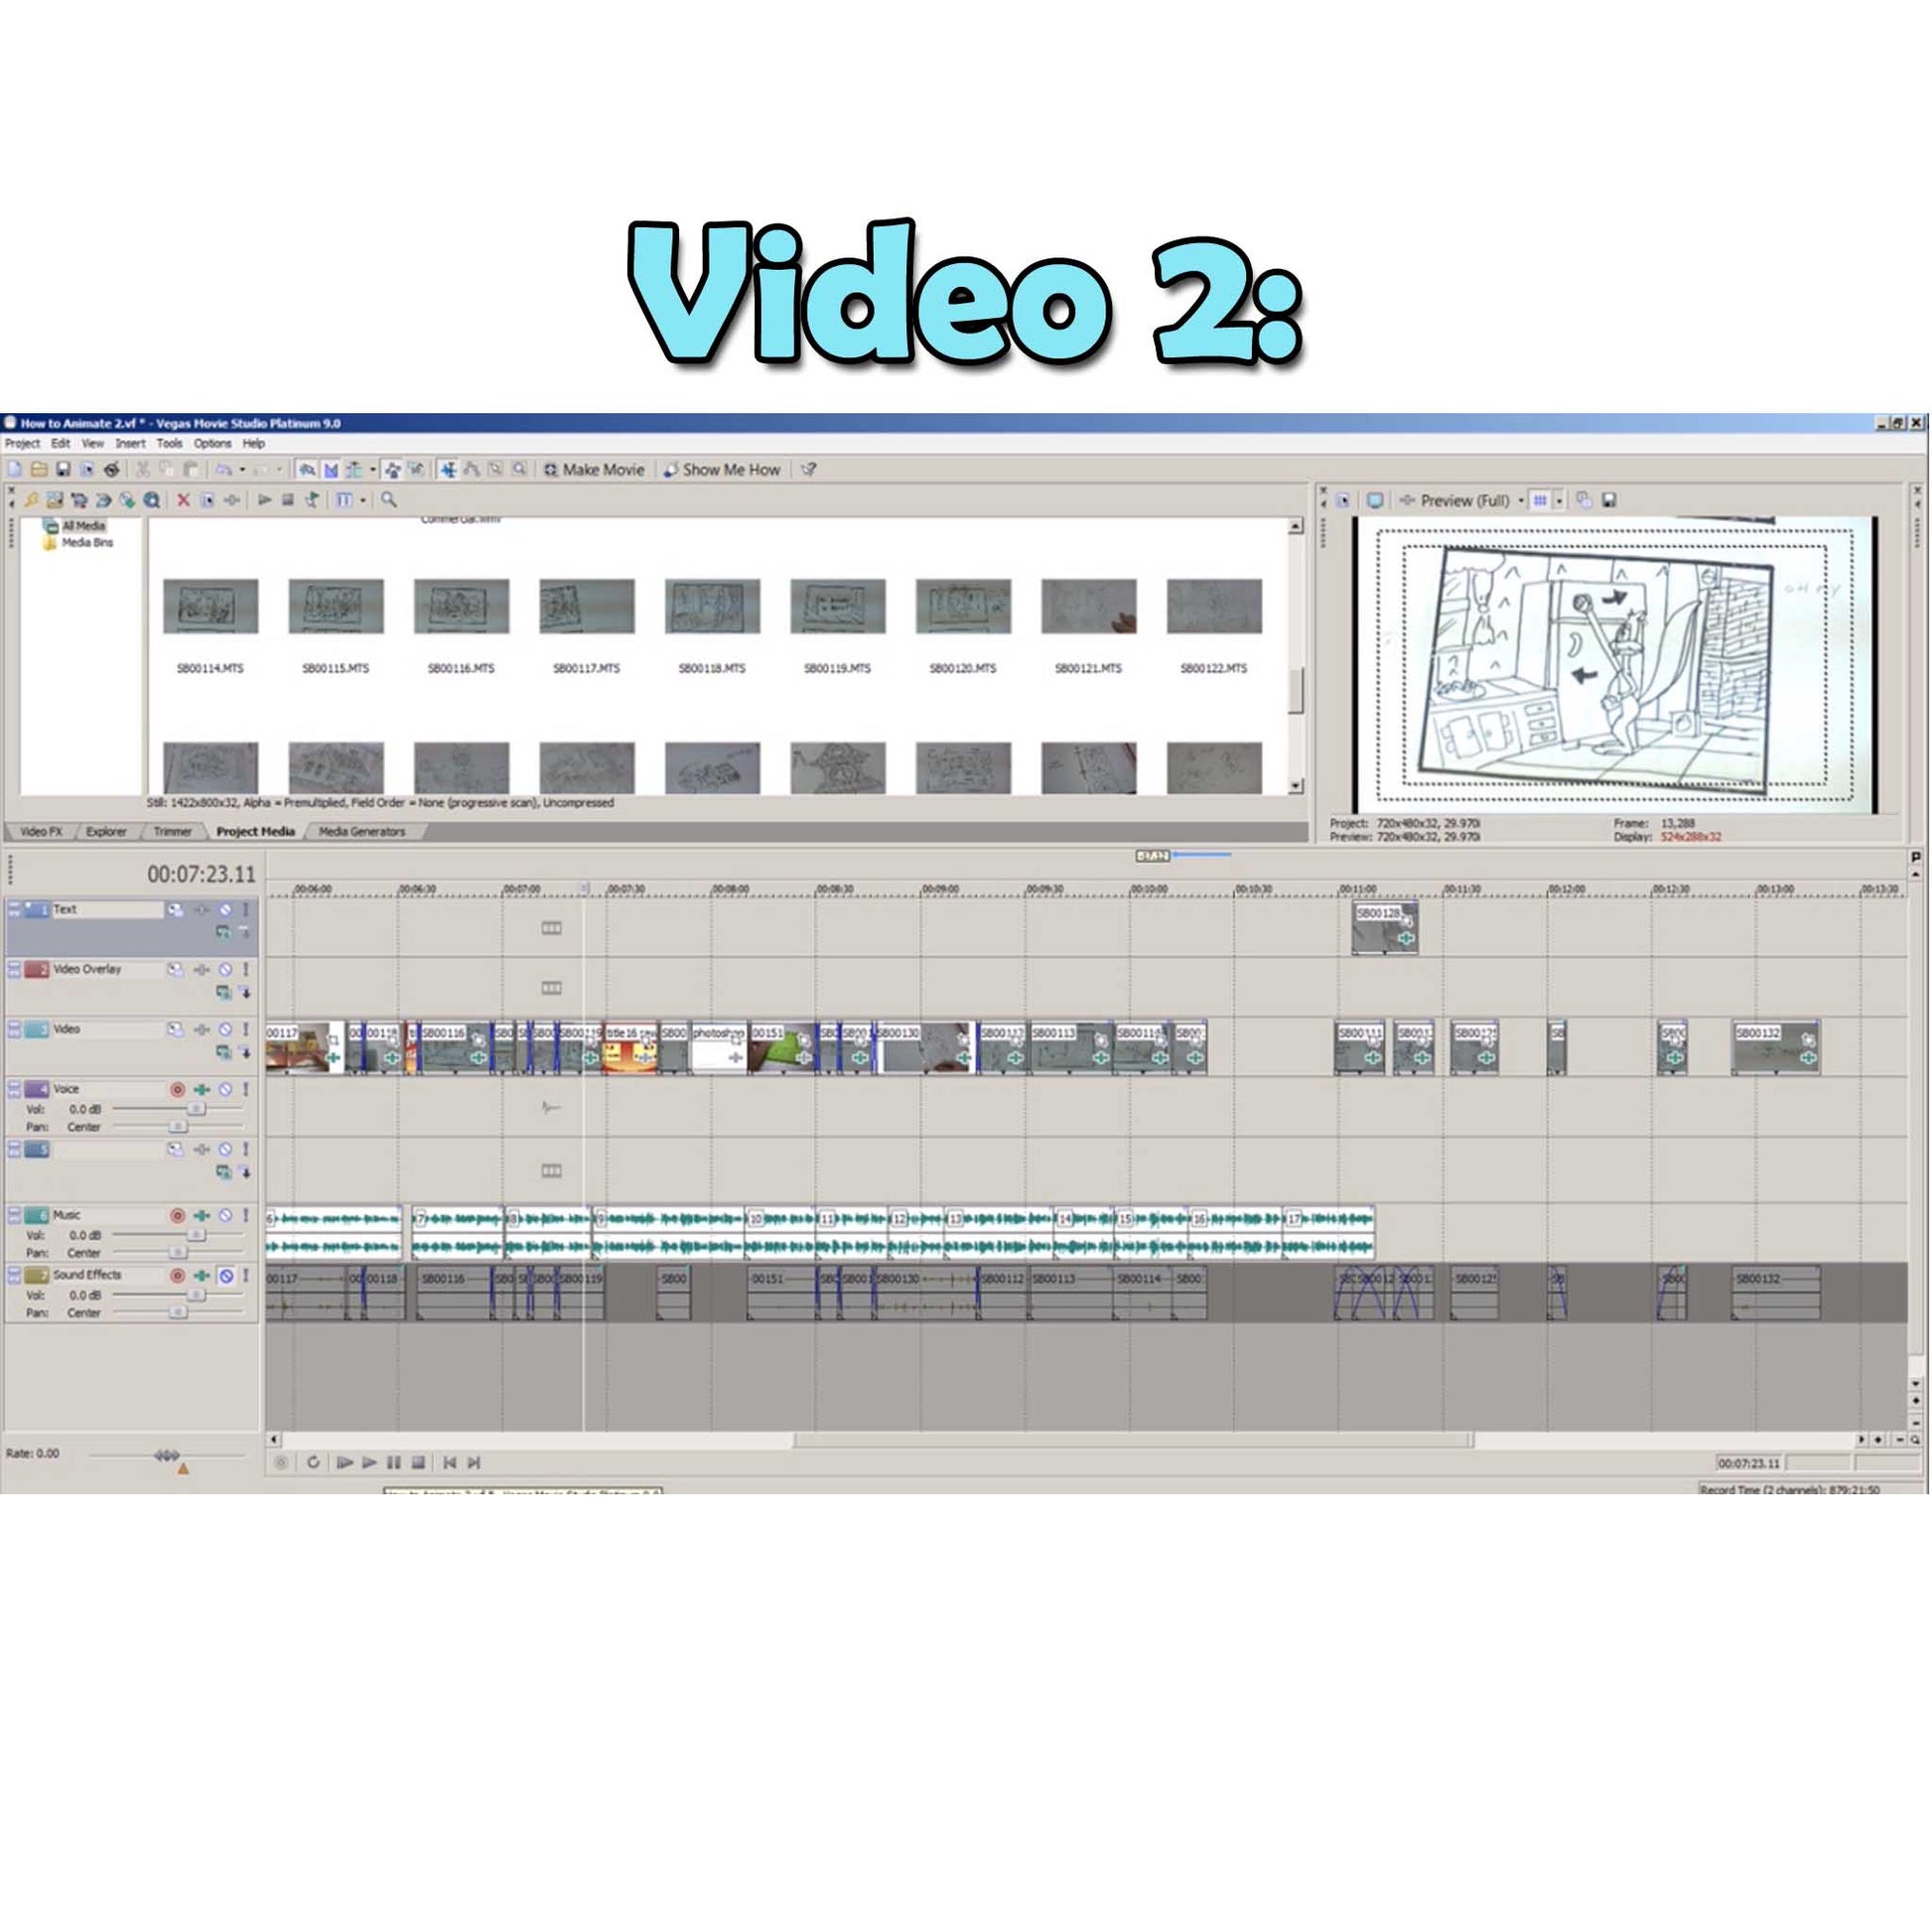 Video 2 of Marc demonstrating video editing with Sony Vegas